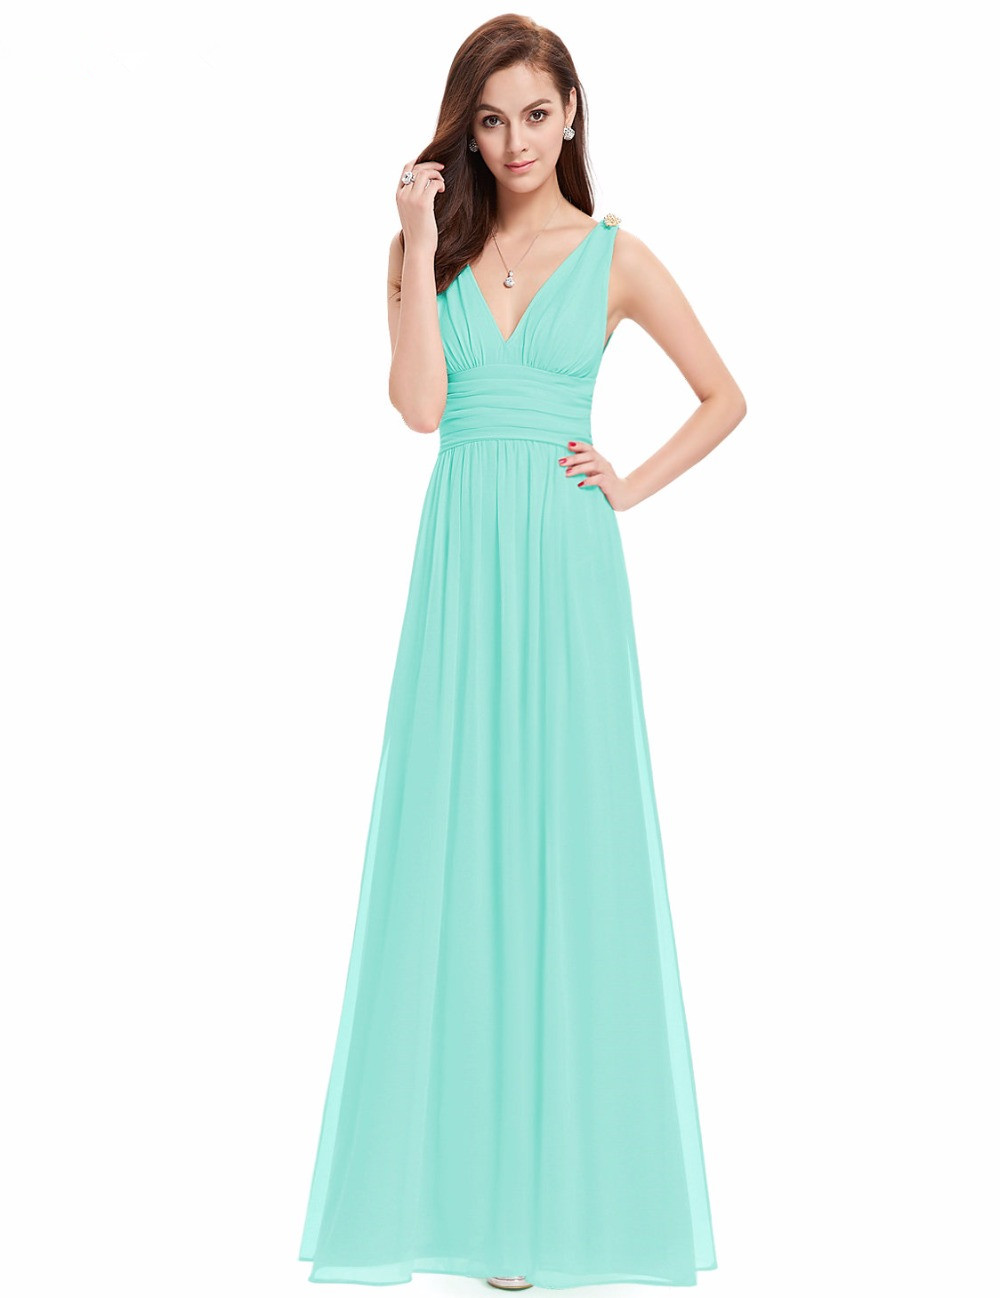 Bellasprom V-Neck Prom Dress Long Sleeveless Evening Party Gowns Chiffon